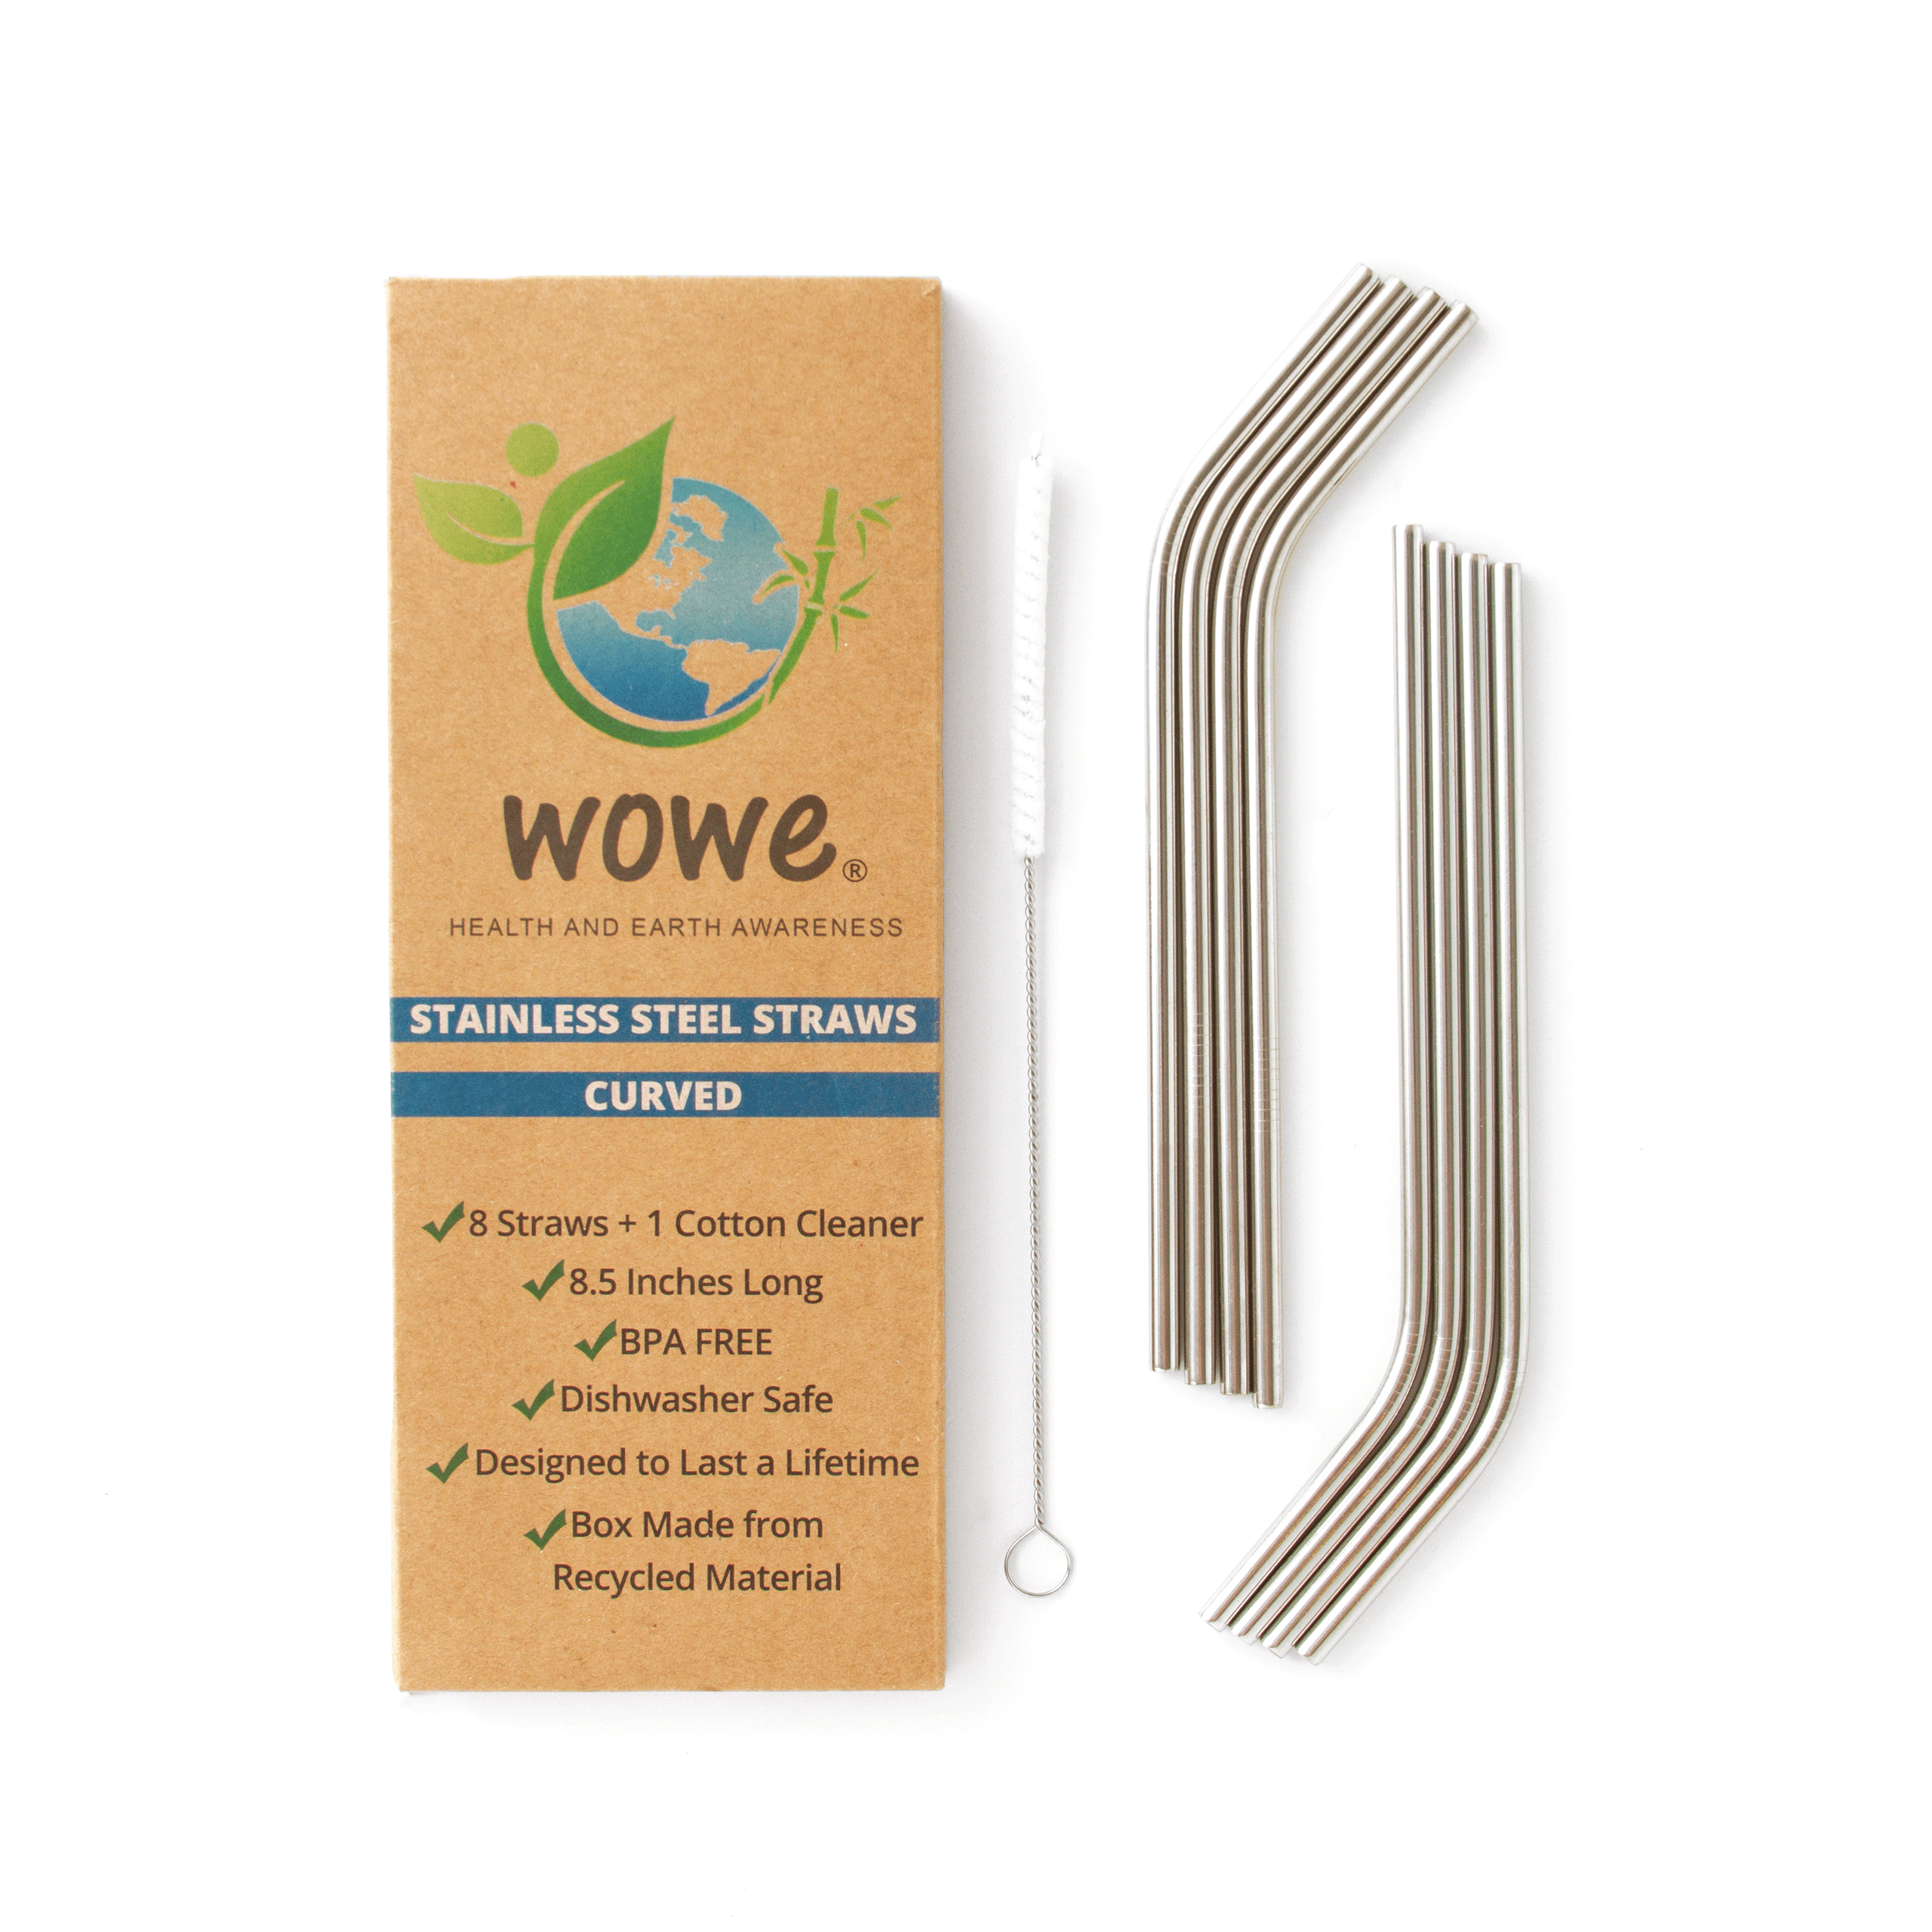 Wowe | Reusable Curved Stainless Steel  Drinking Straws With Cleaning Brush, Straws, Wowe, Defiance Outdoor Gear Co.